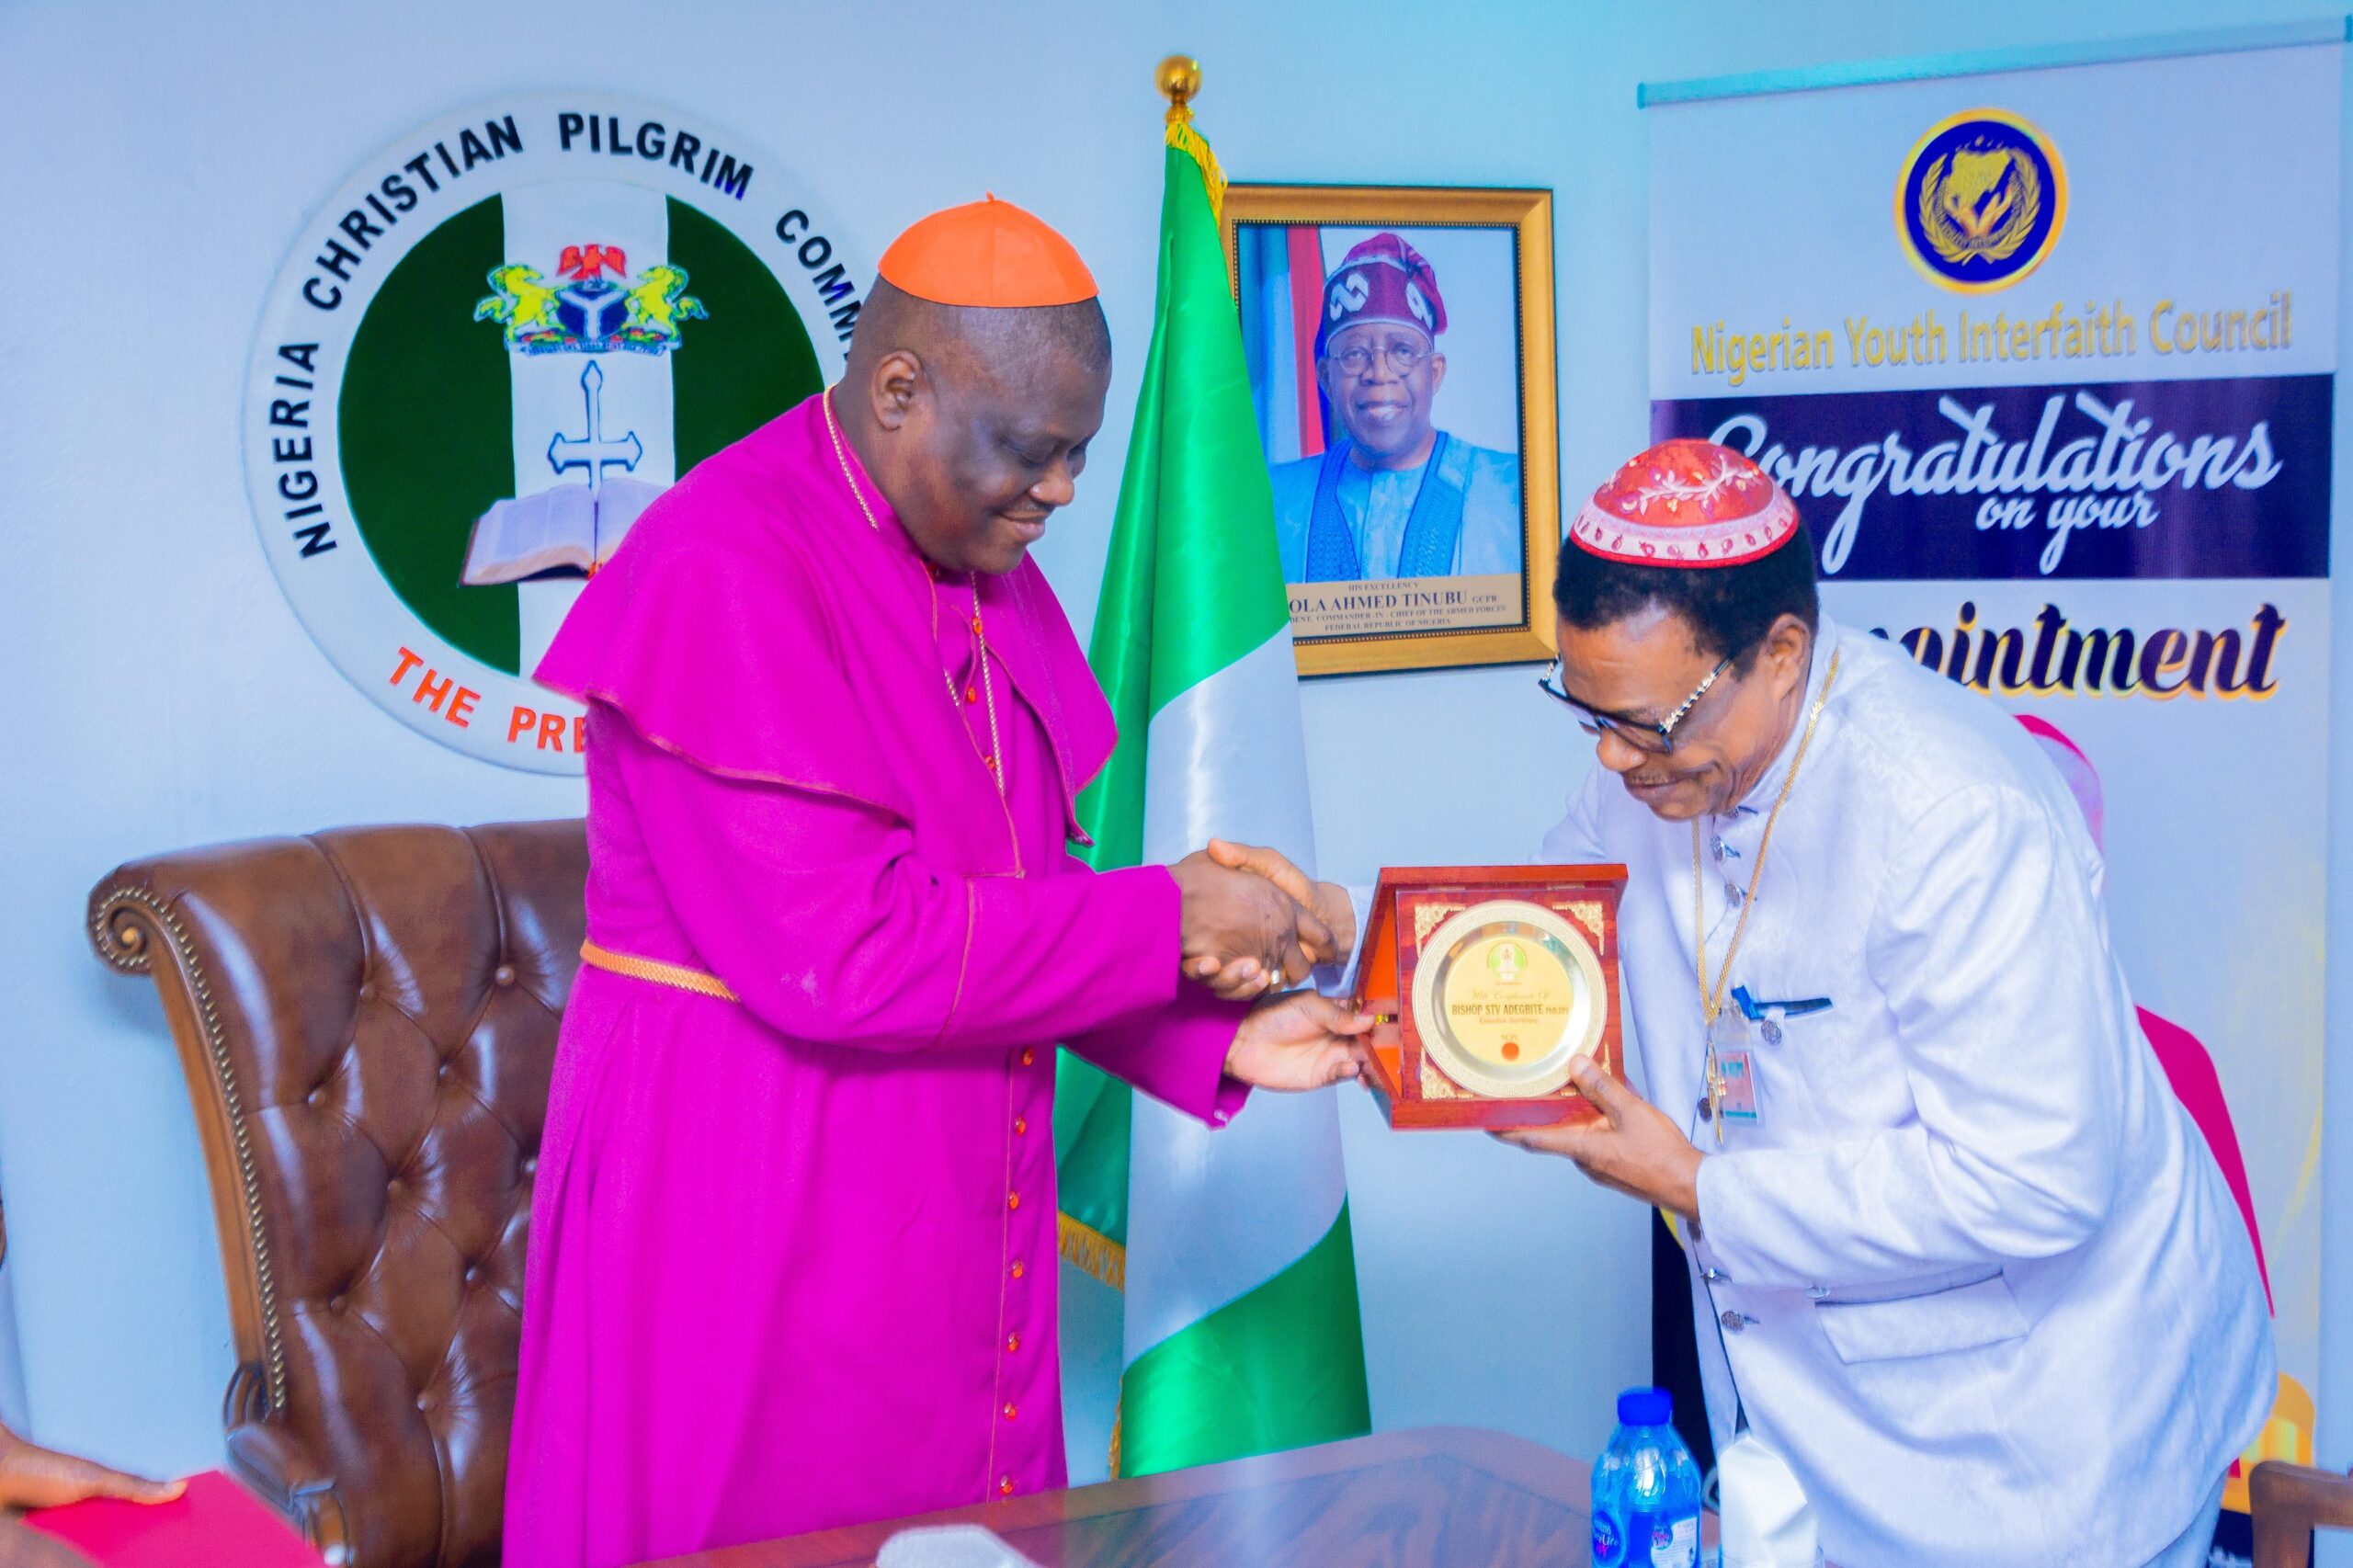 “We Must Protect Our Pilgrims” – NCPC Boss, Bishop Stephen Adegbite